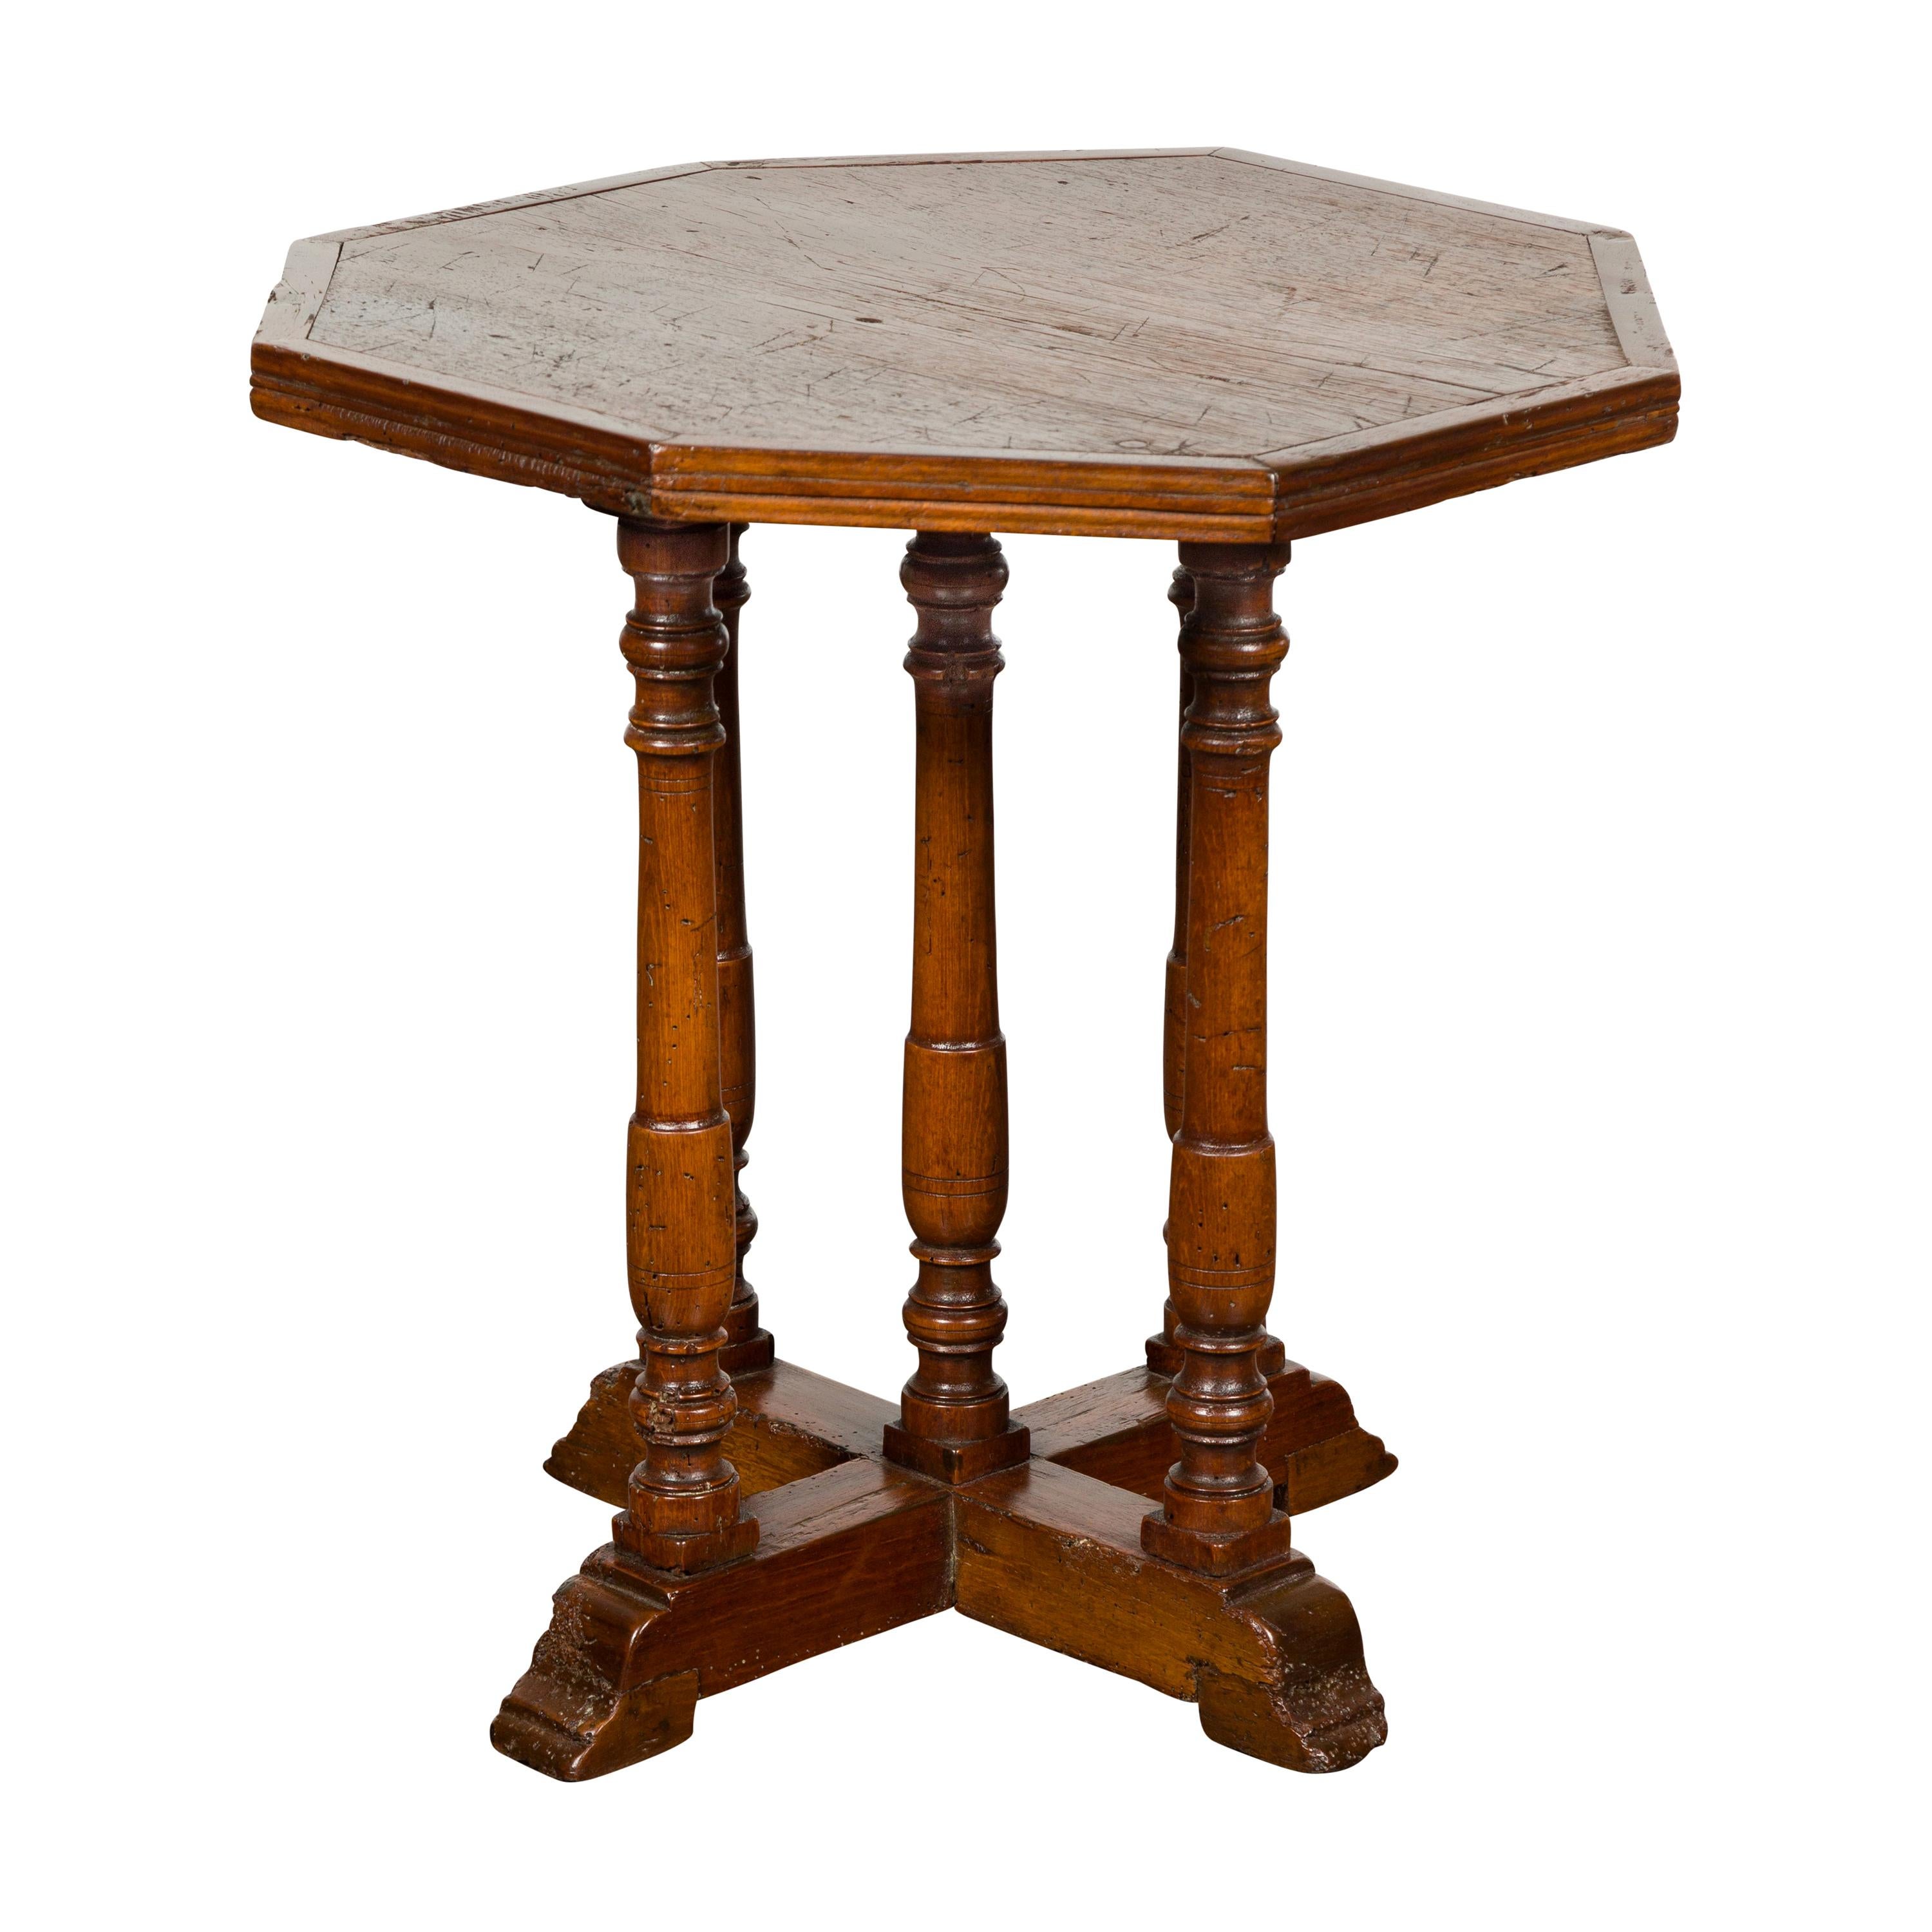 Italian 1800s Low Side table with Octagonal Top, Turned Legs and X-Form Plinth